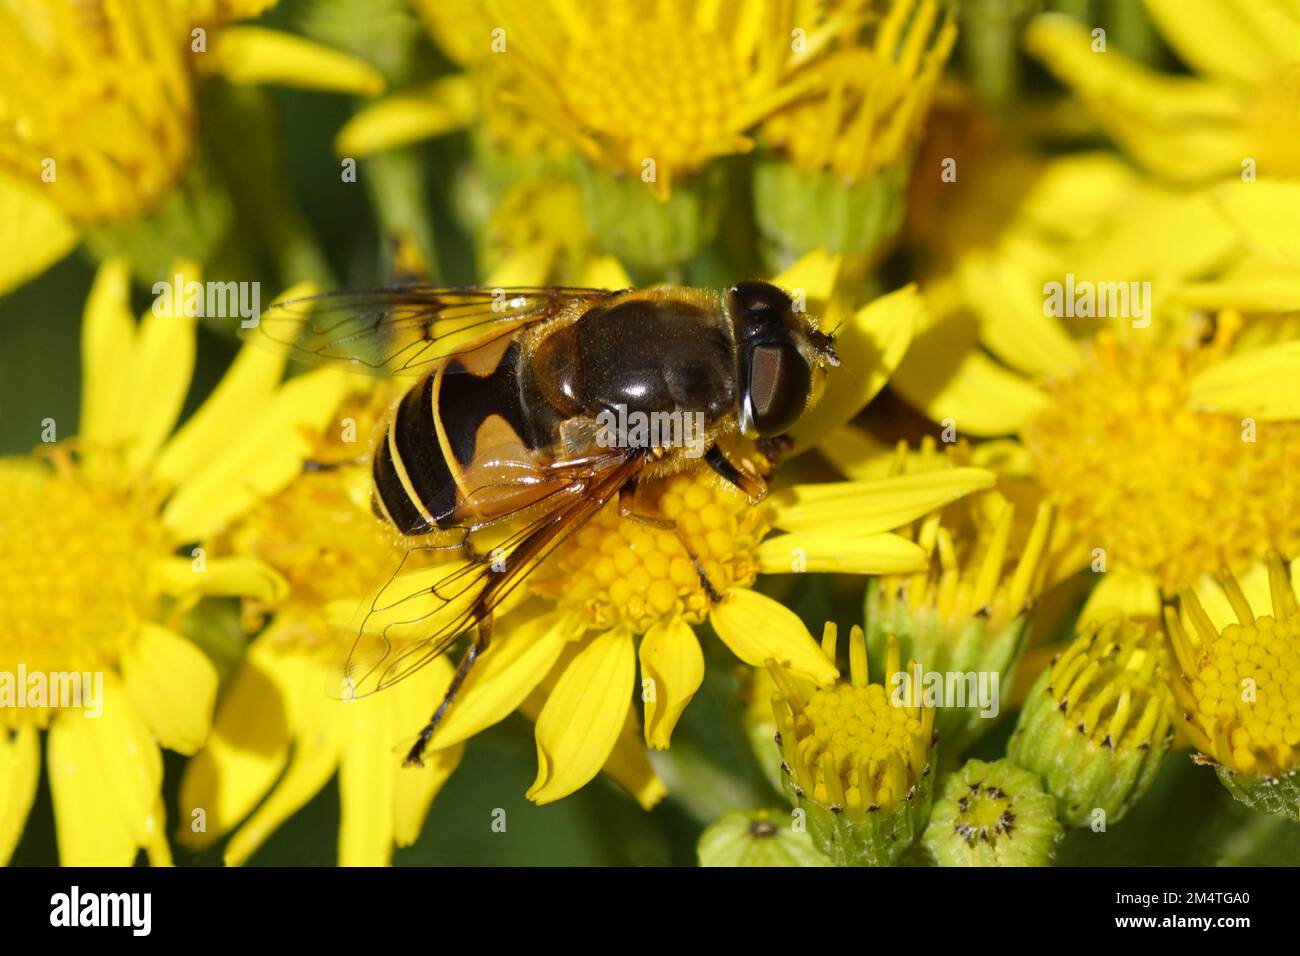 horticola close up stock and images - Alamy